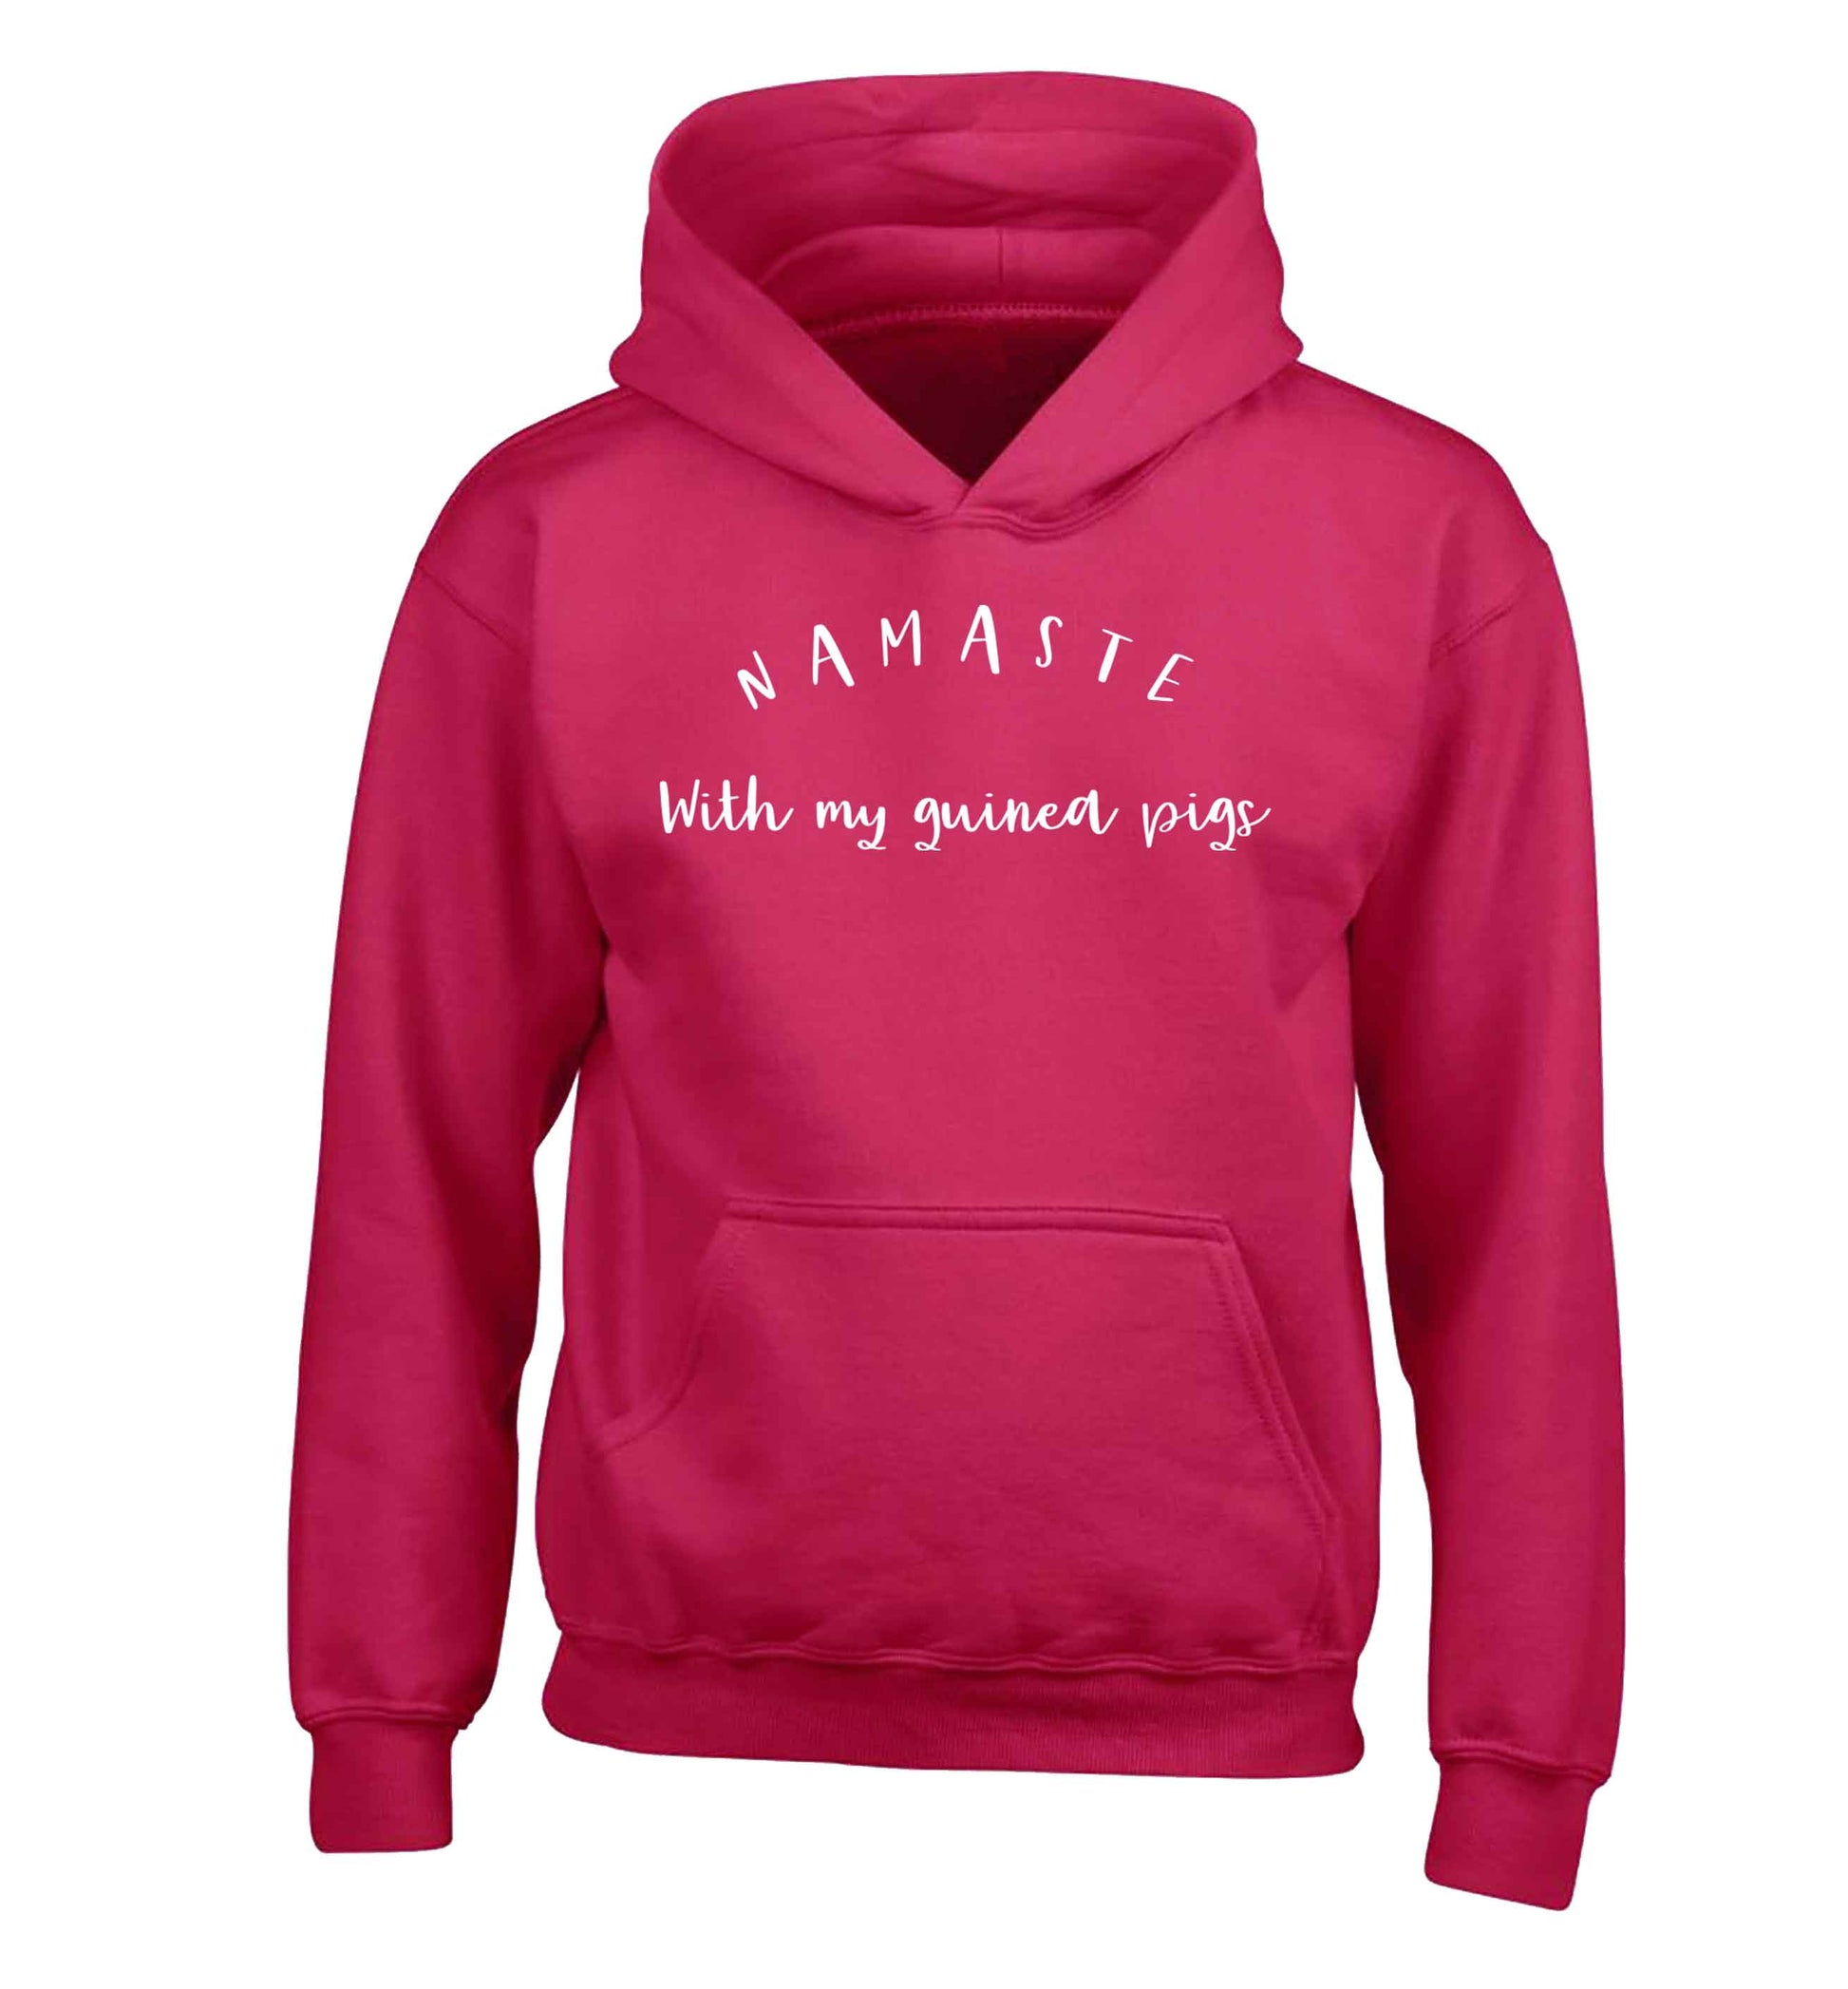 Namaste with my guinea pigs children's pink hoodie 12-13 Years